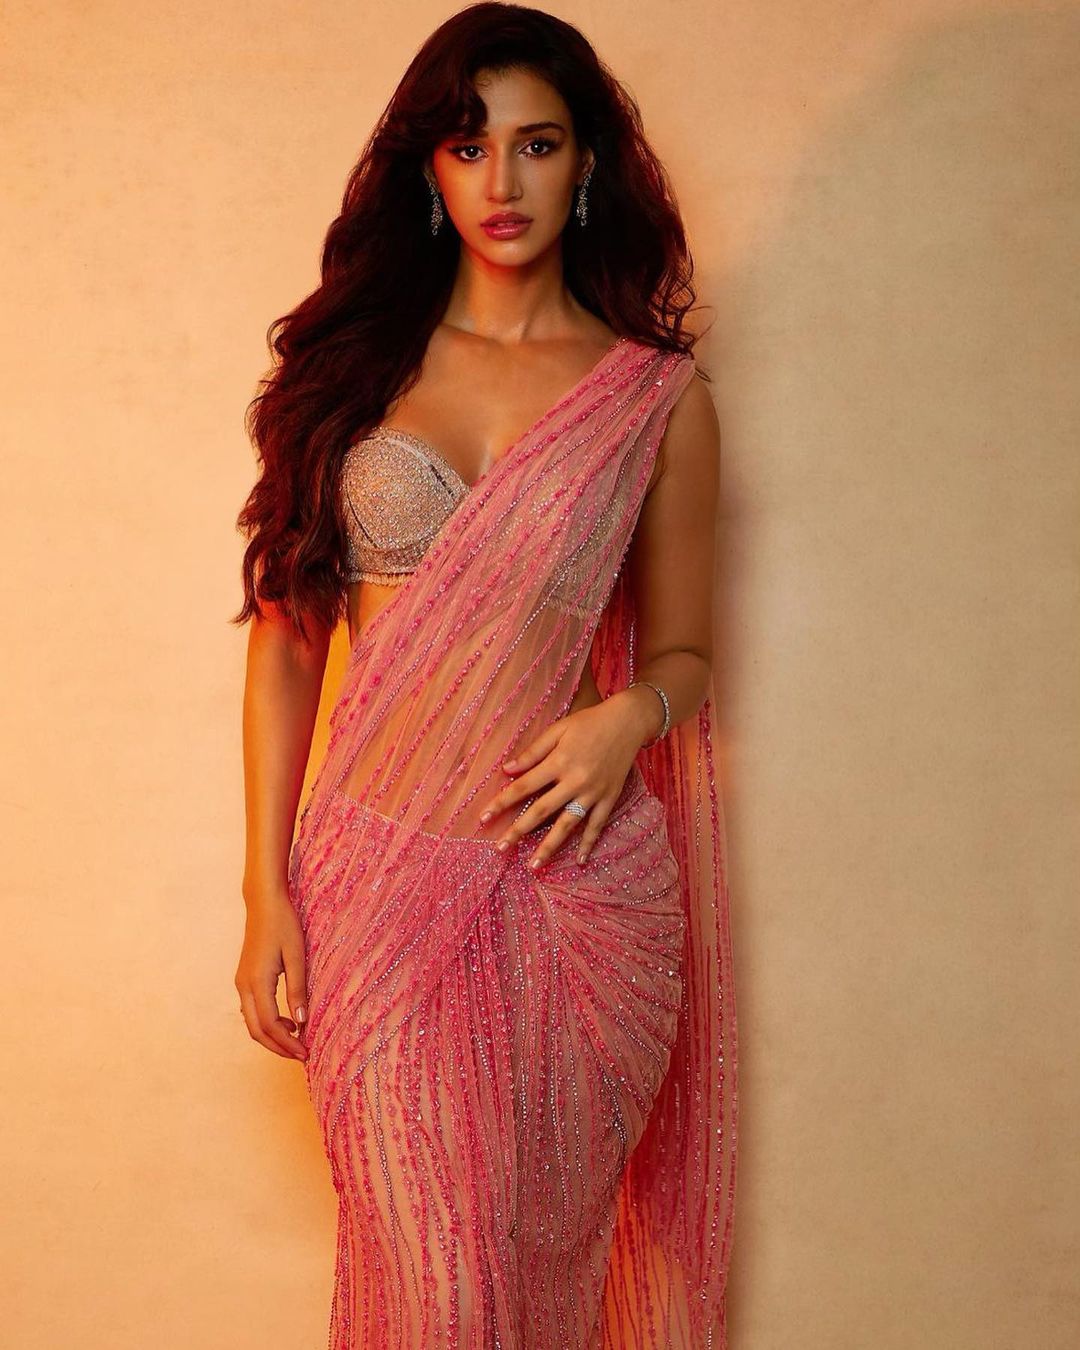 Disha Patani is making internet go tizzy with her saree-clad pictures. 